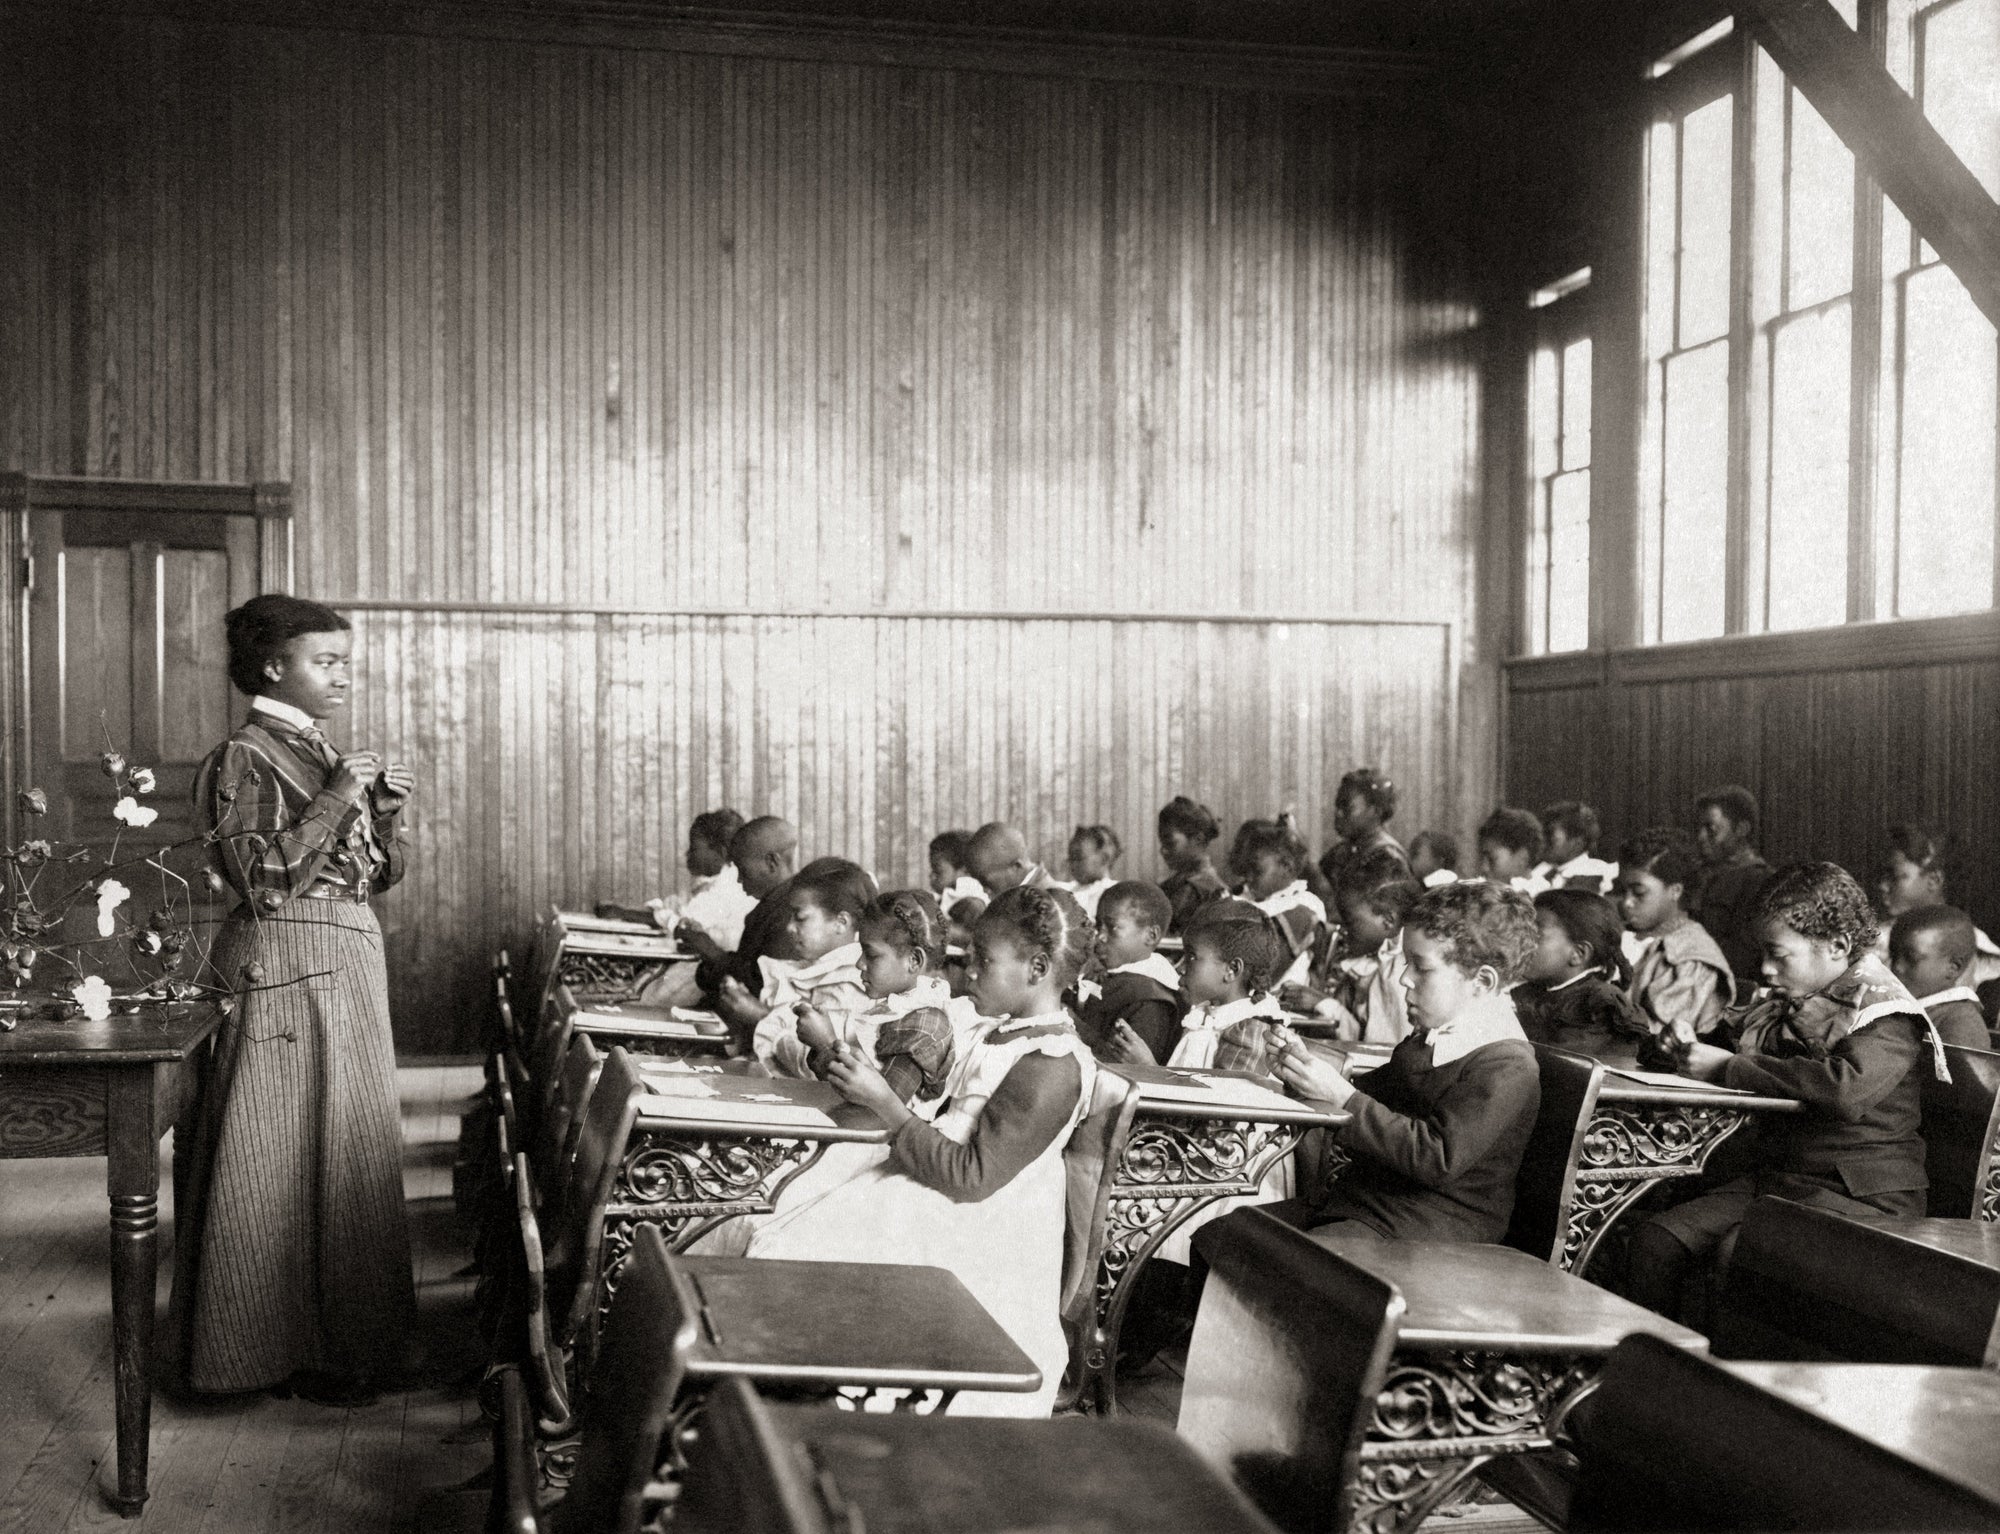 African American Students in Classroom, Virginia, 1899-1900 Historical Pix